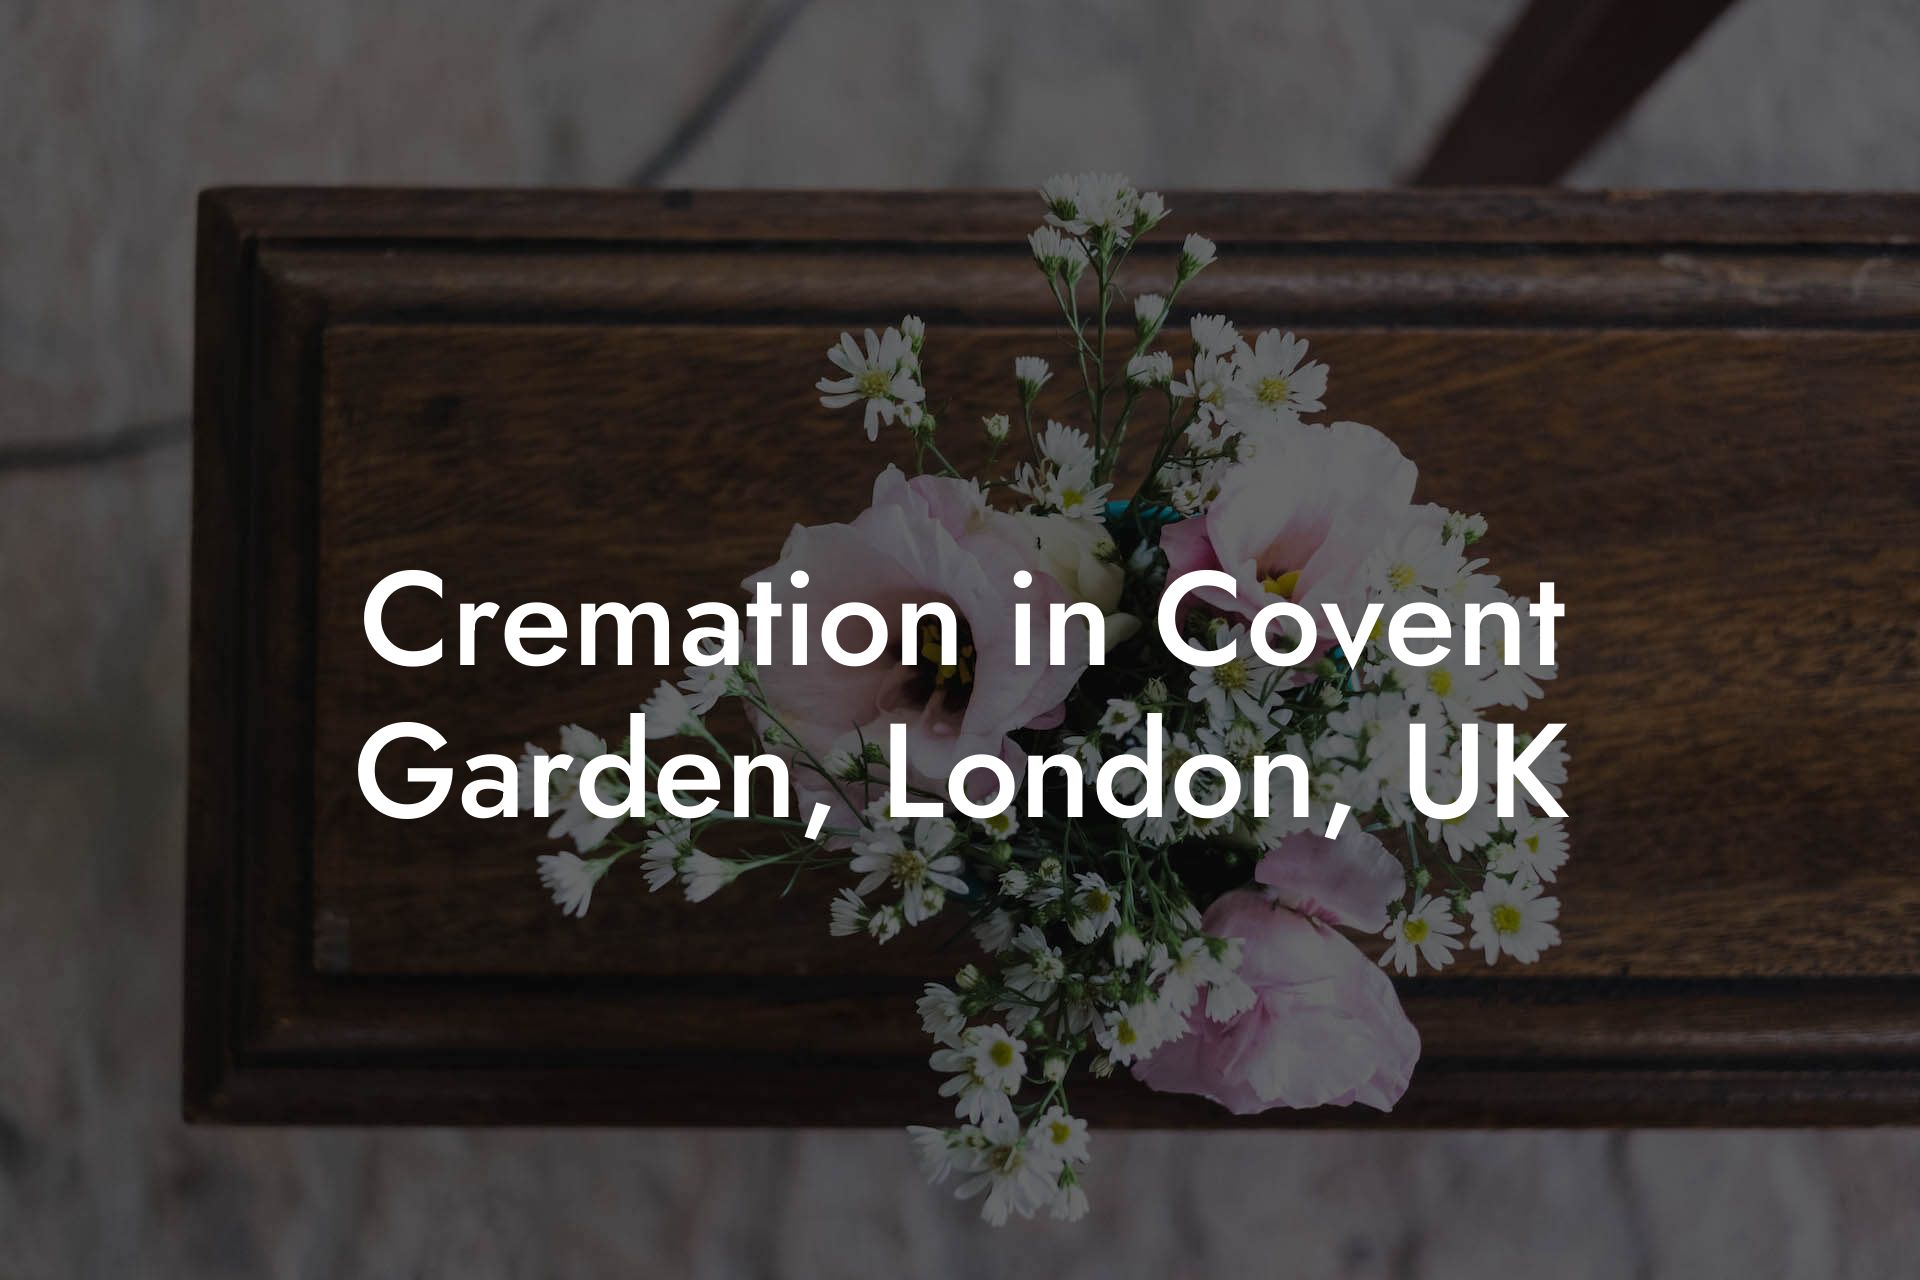 Cremation in Covent Garden, London, UK